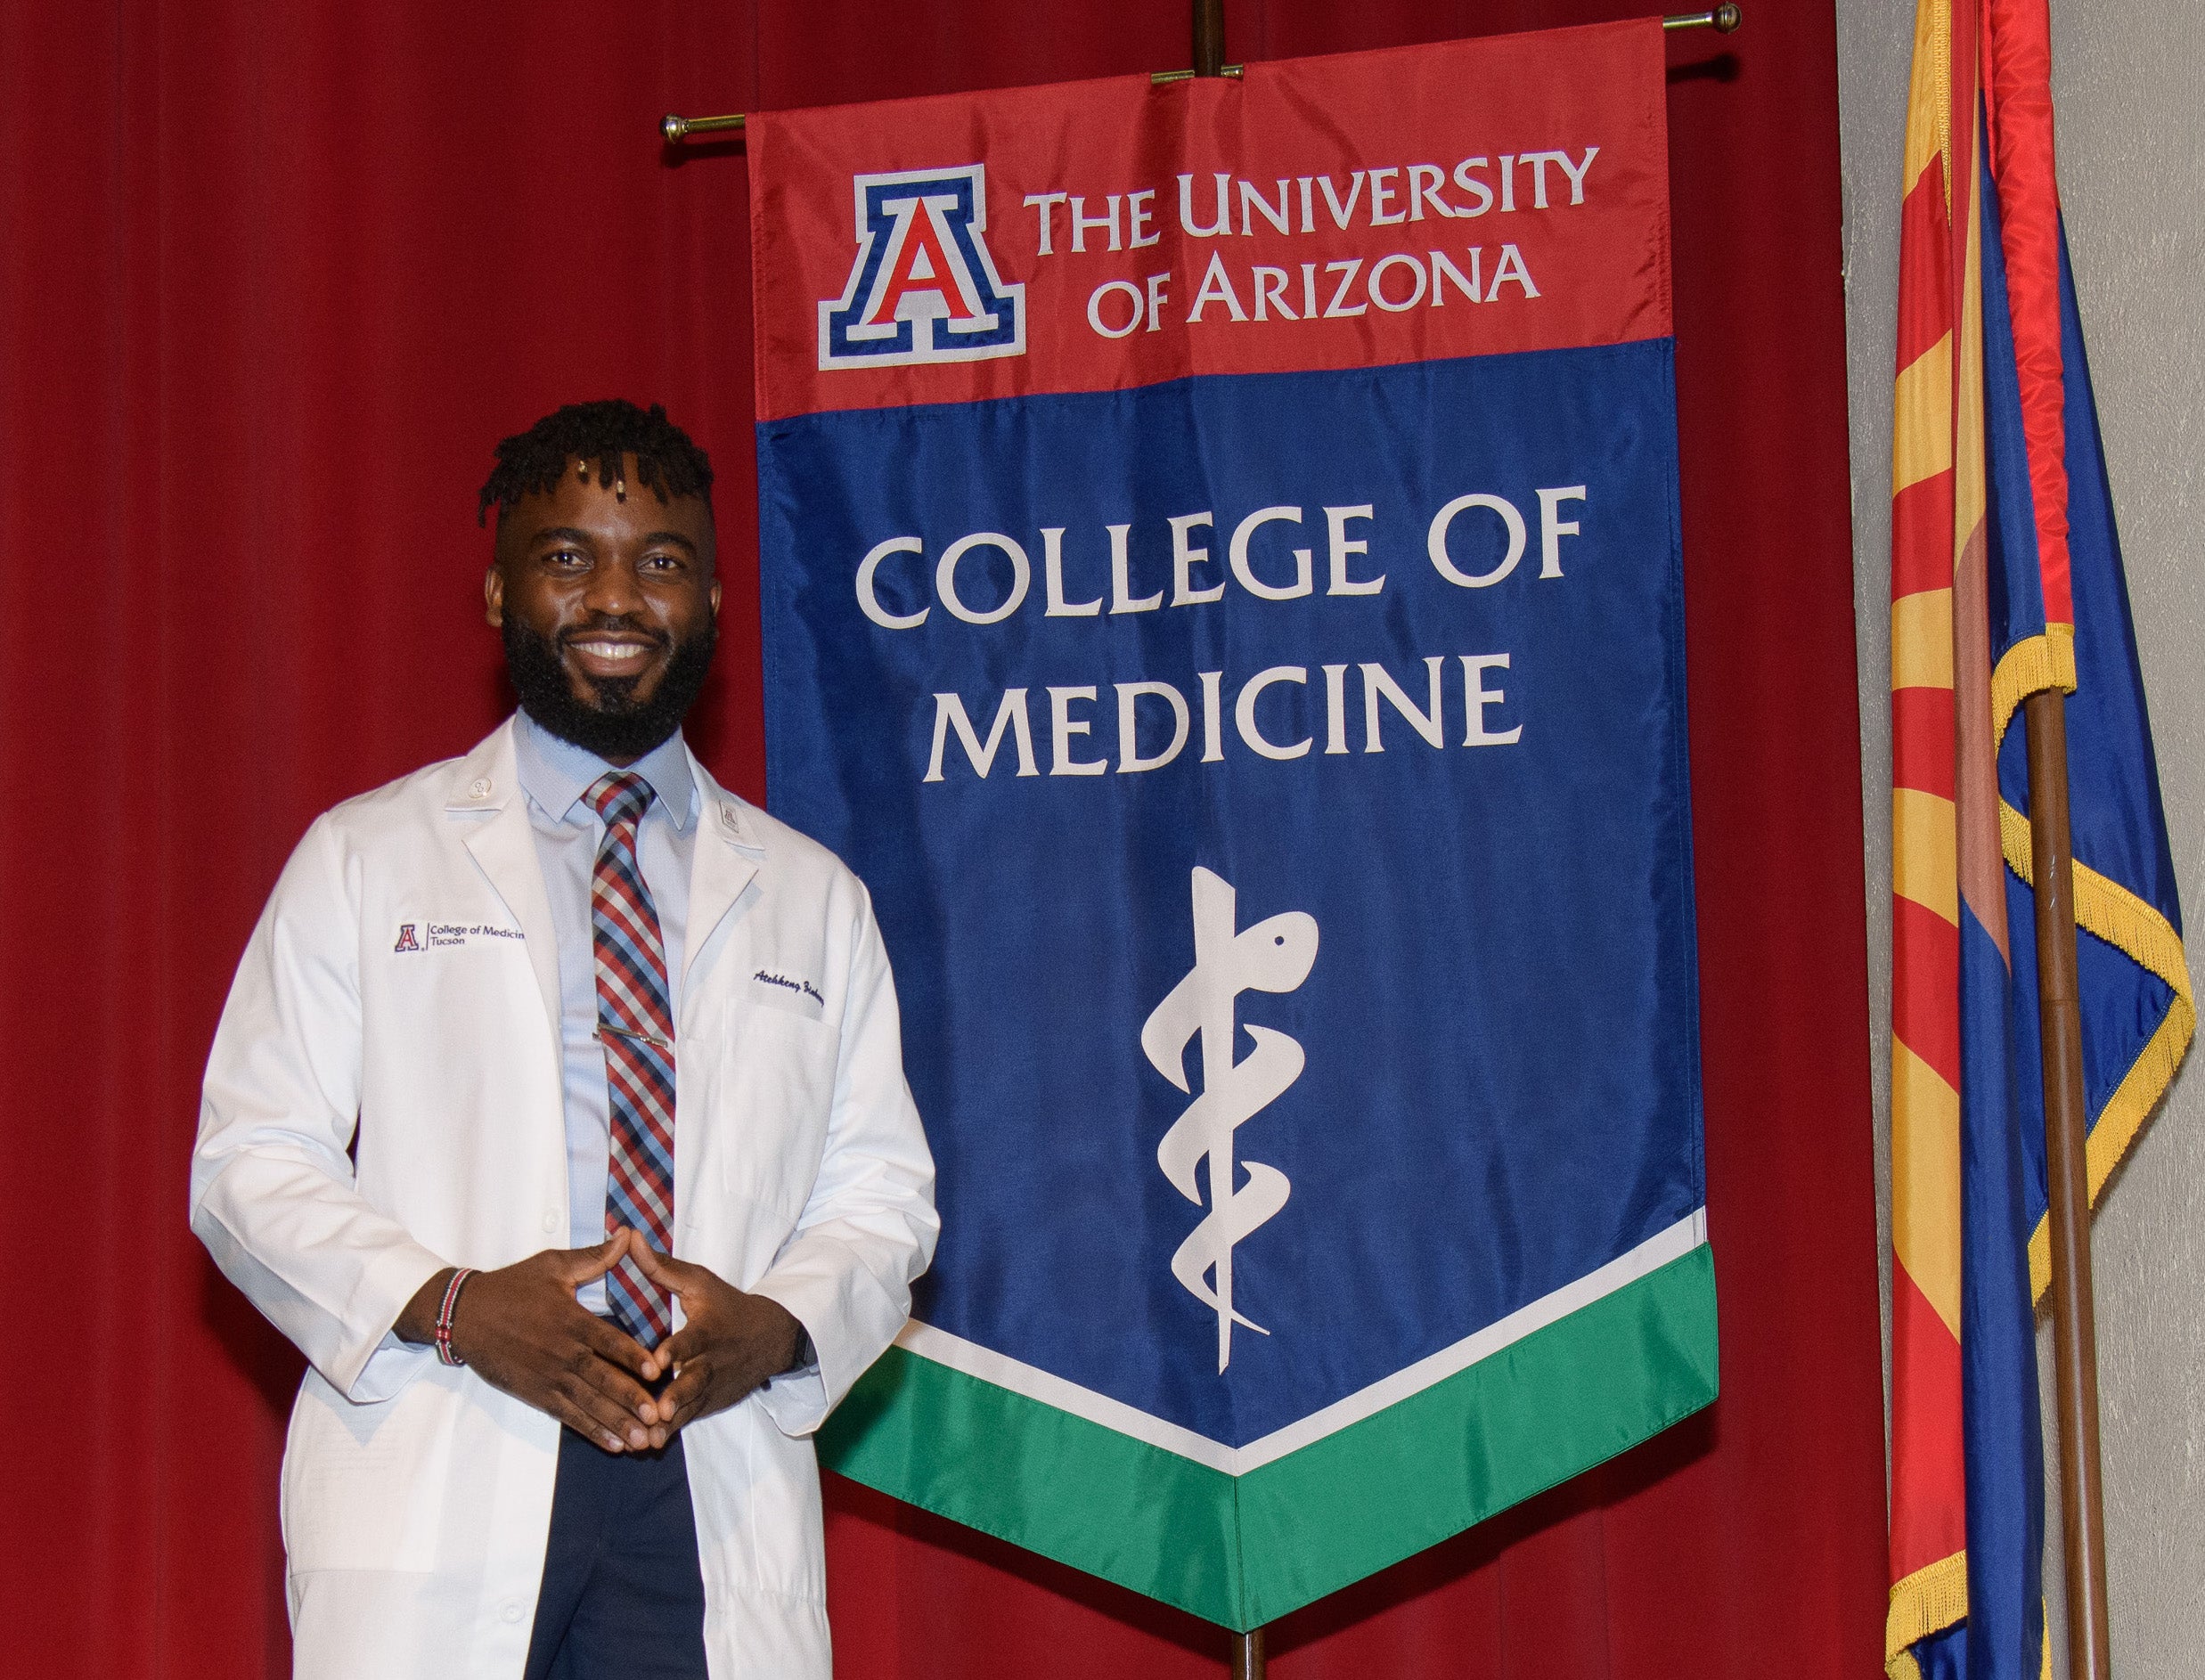 Ateh Zinkeng in his medical white coat standing next to The University of Arizona College of Medicine flag.